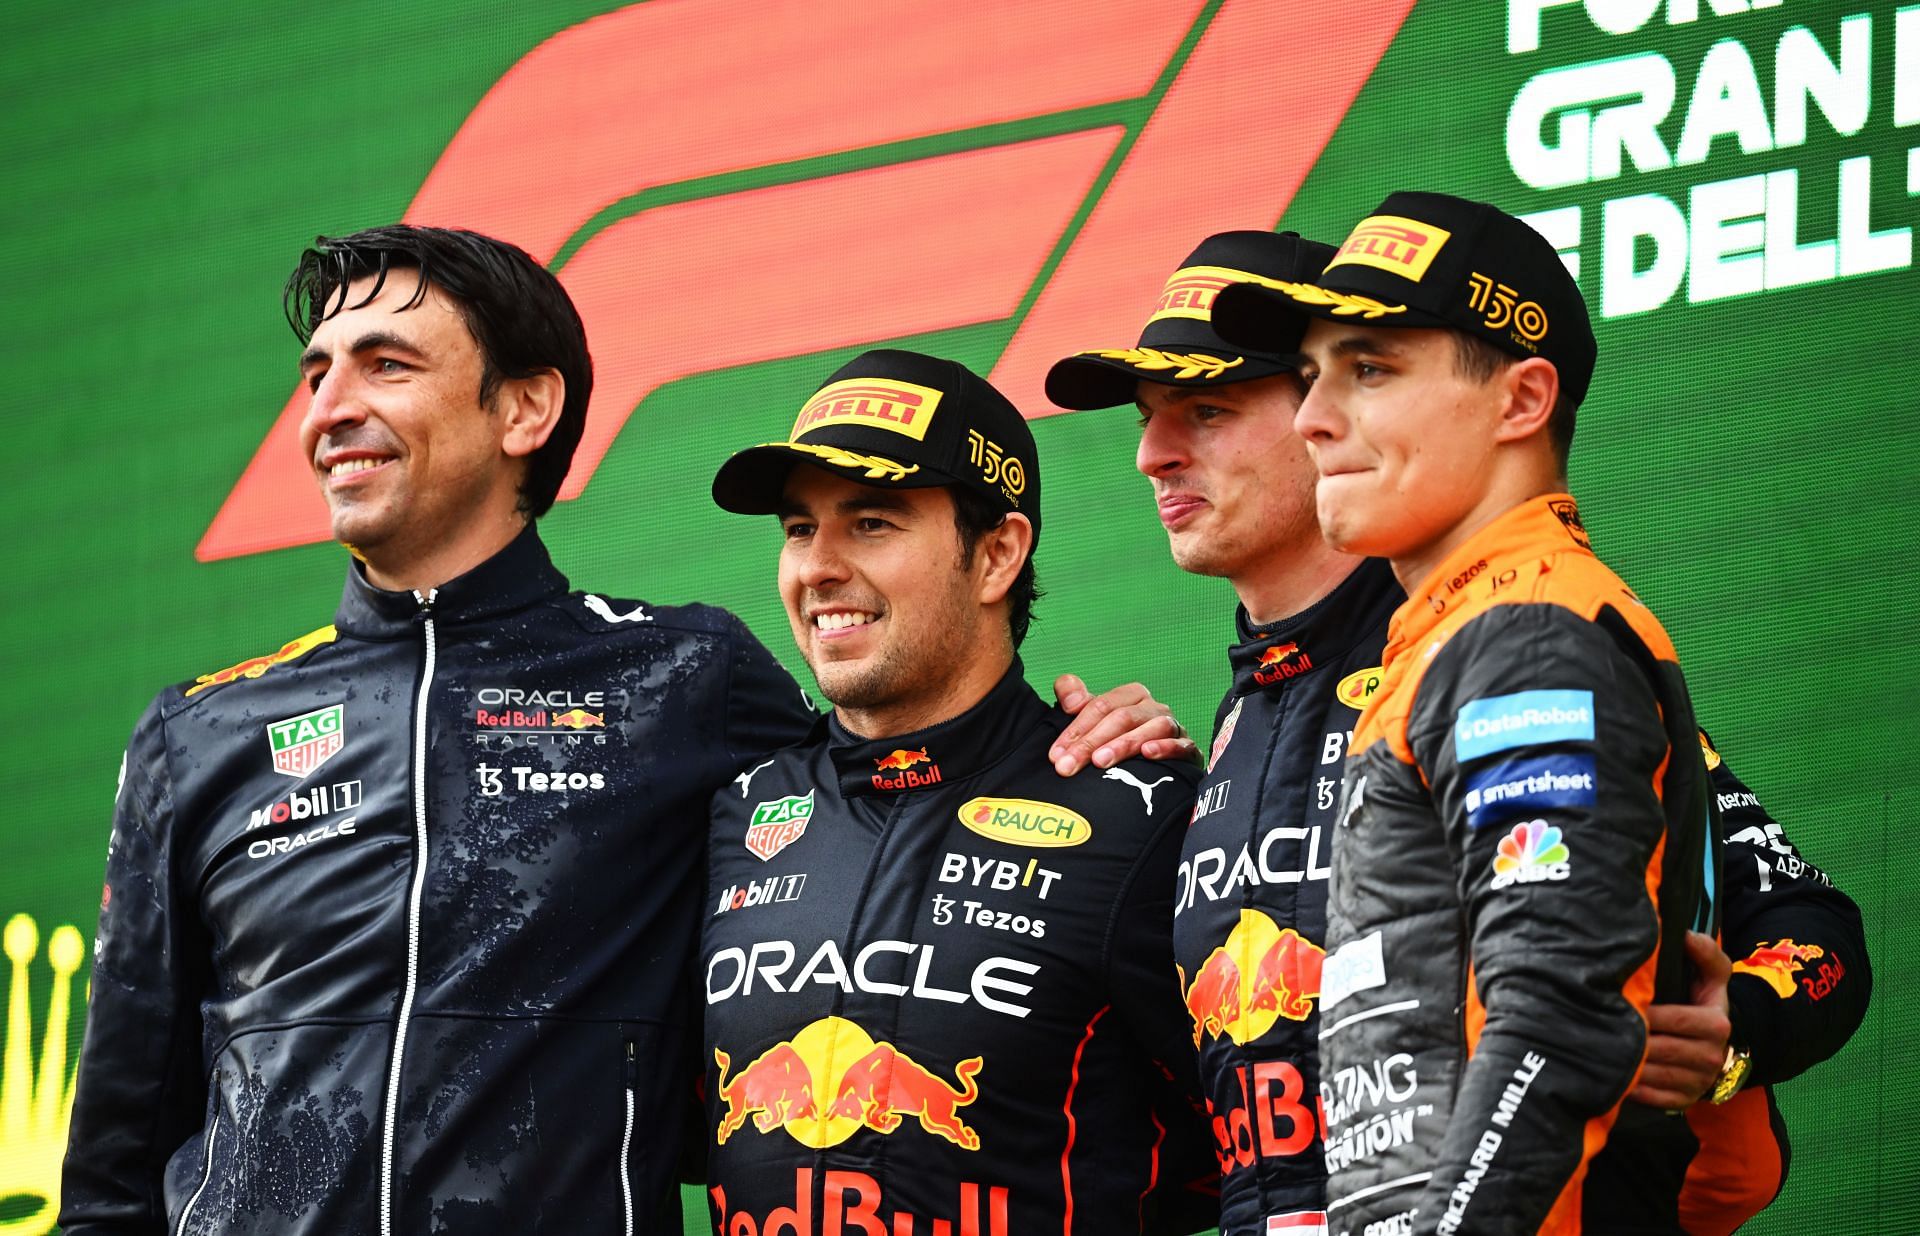 Max Verstappen (2nd from right) made a strong comeback in the championship battle